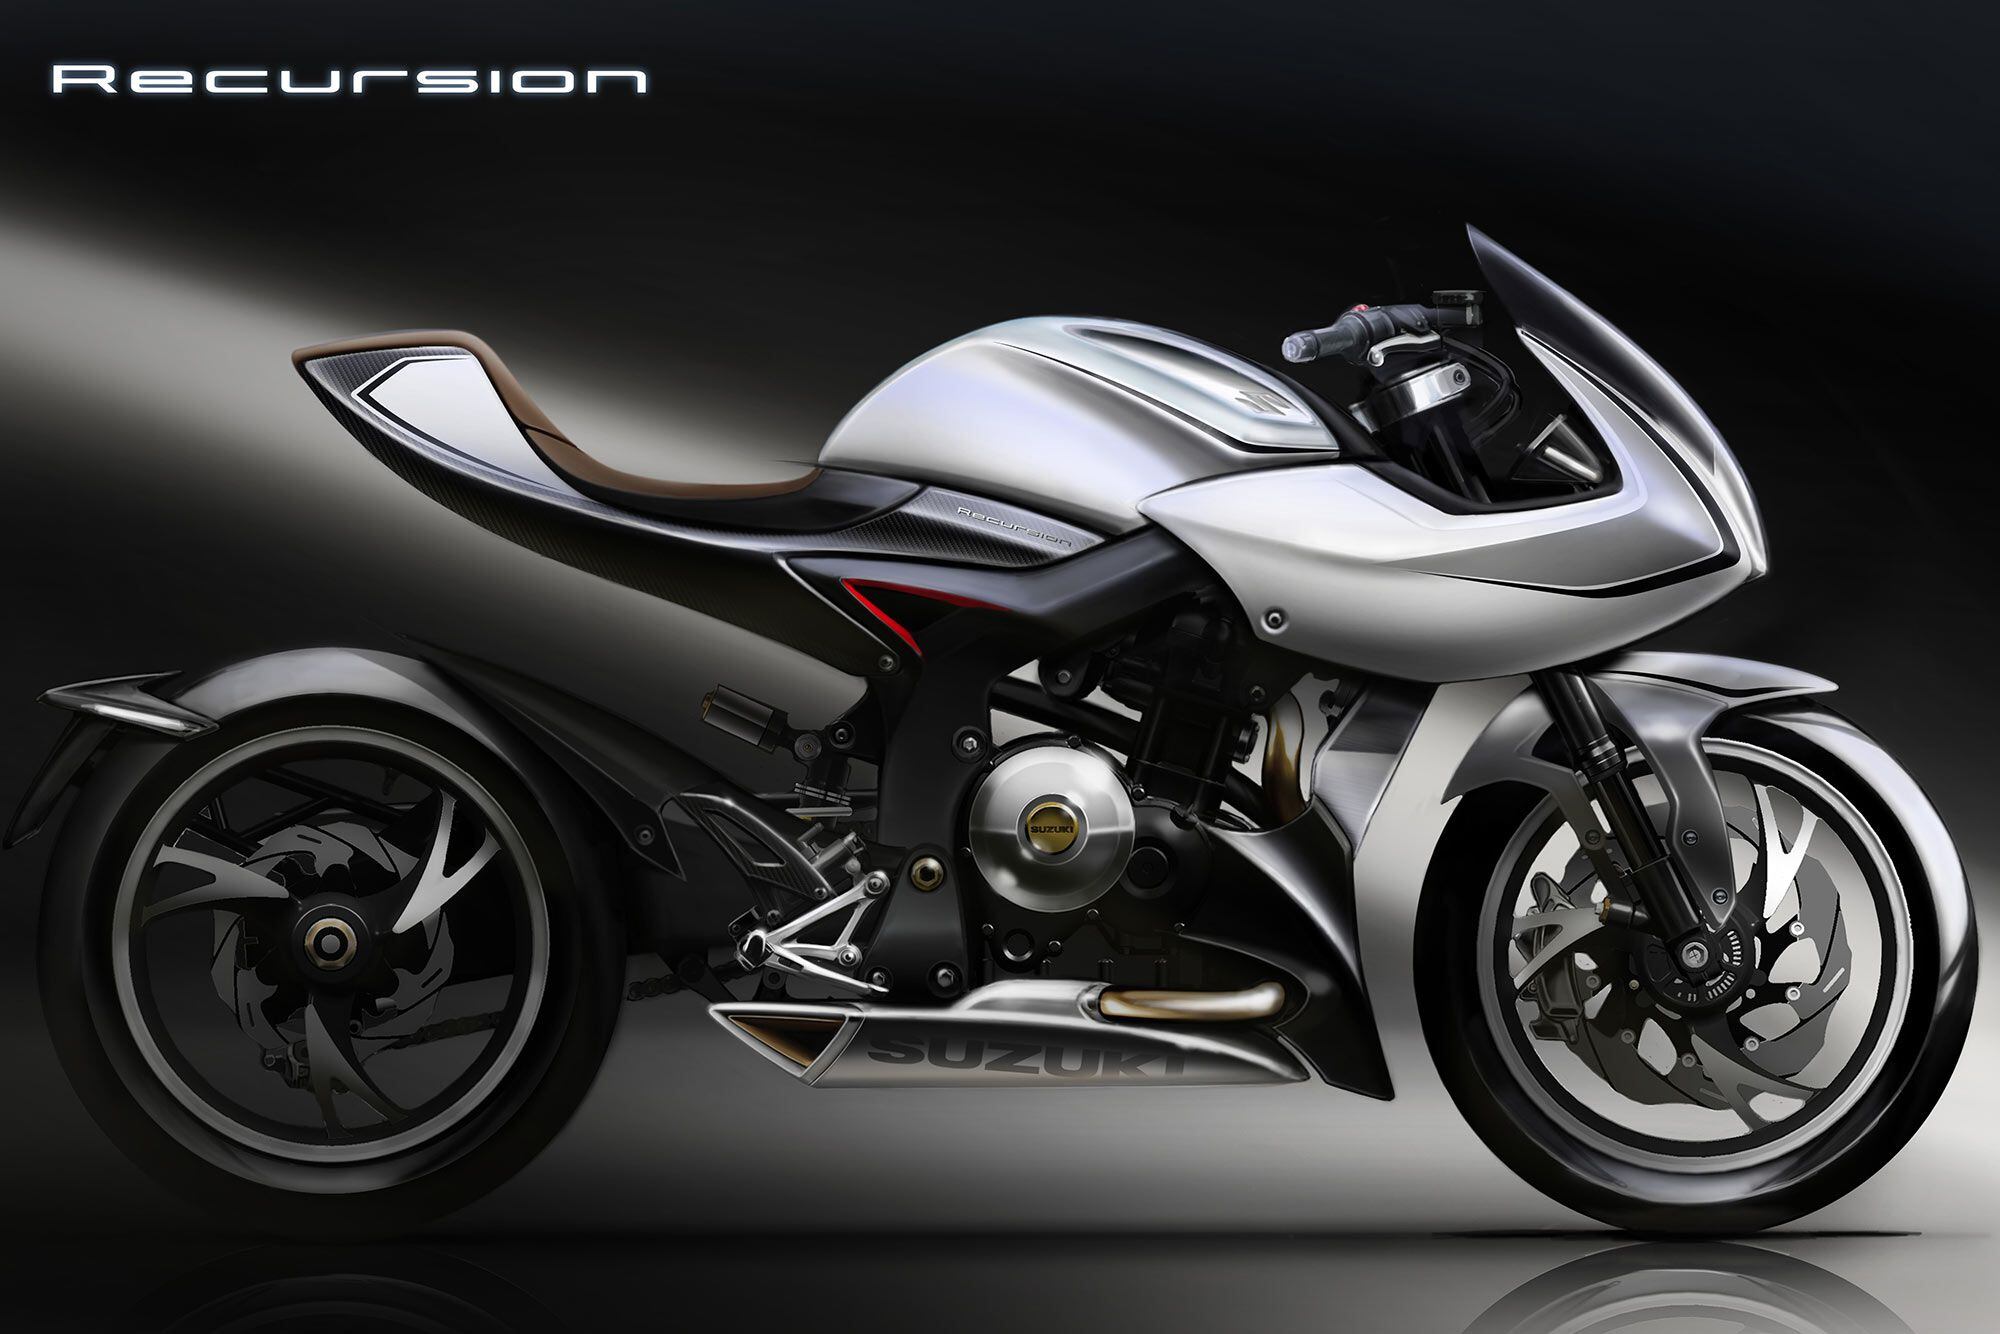 Remember the Recursion concept from way back in 2013? Suzuki may still be pursuing the parallel-twin engine design seen in that bike for future models.